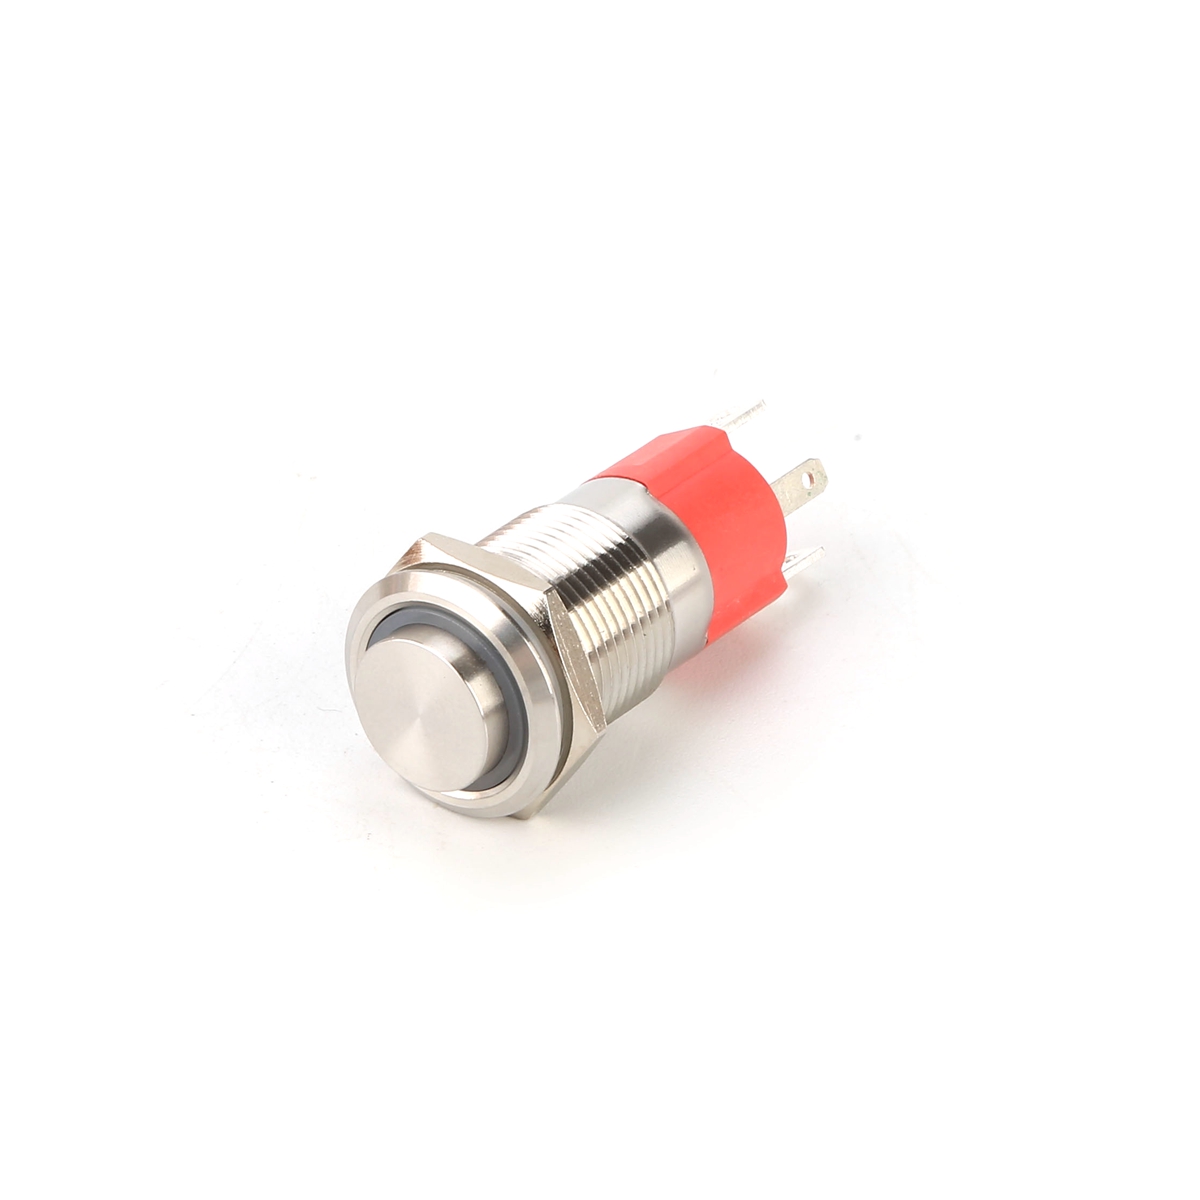 16MM-10A-250V-12V-4Pin-LED-Light-Button-Switch-Momentary-Reset-Metal-Push-Button-Switch-1493146-6